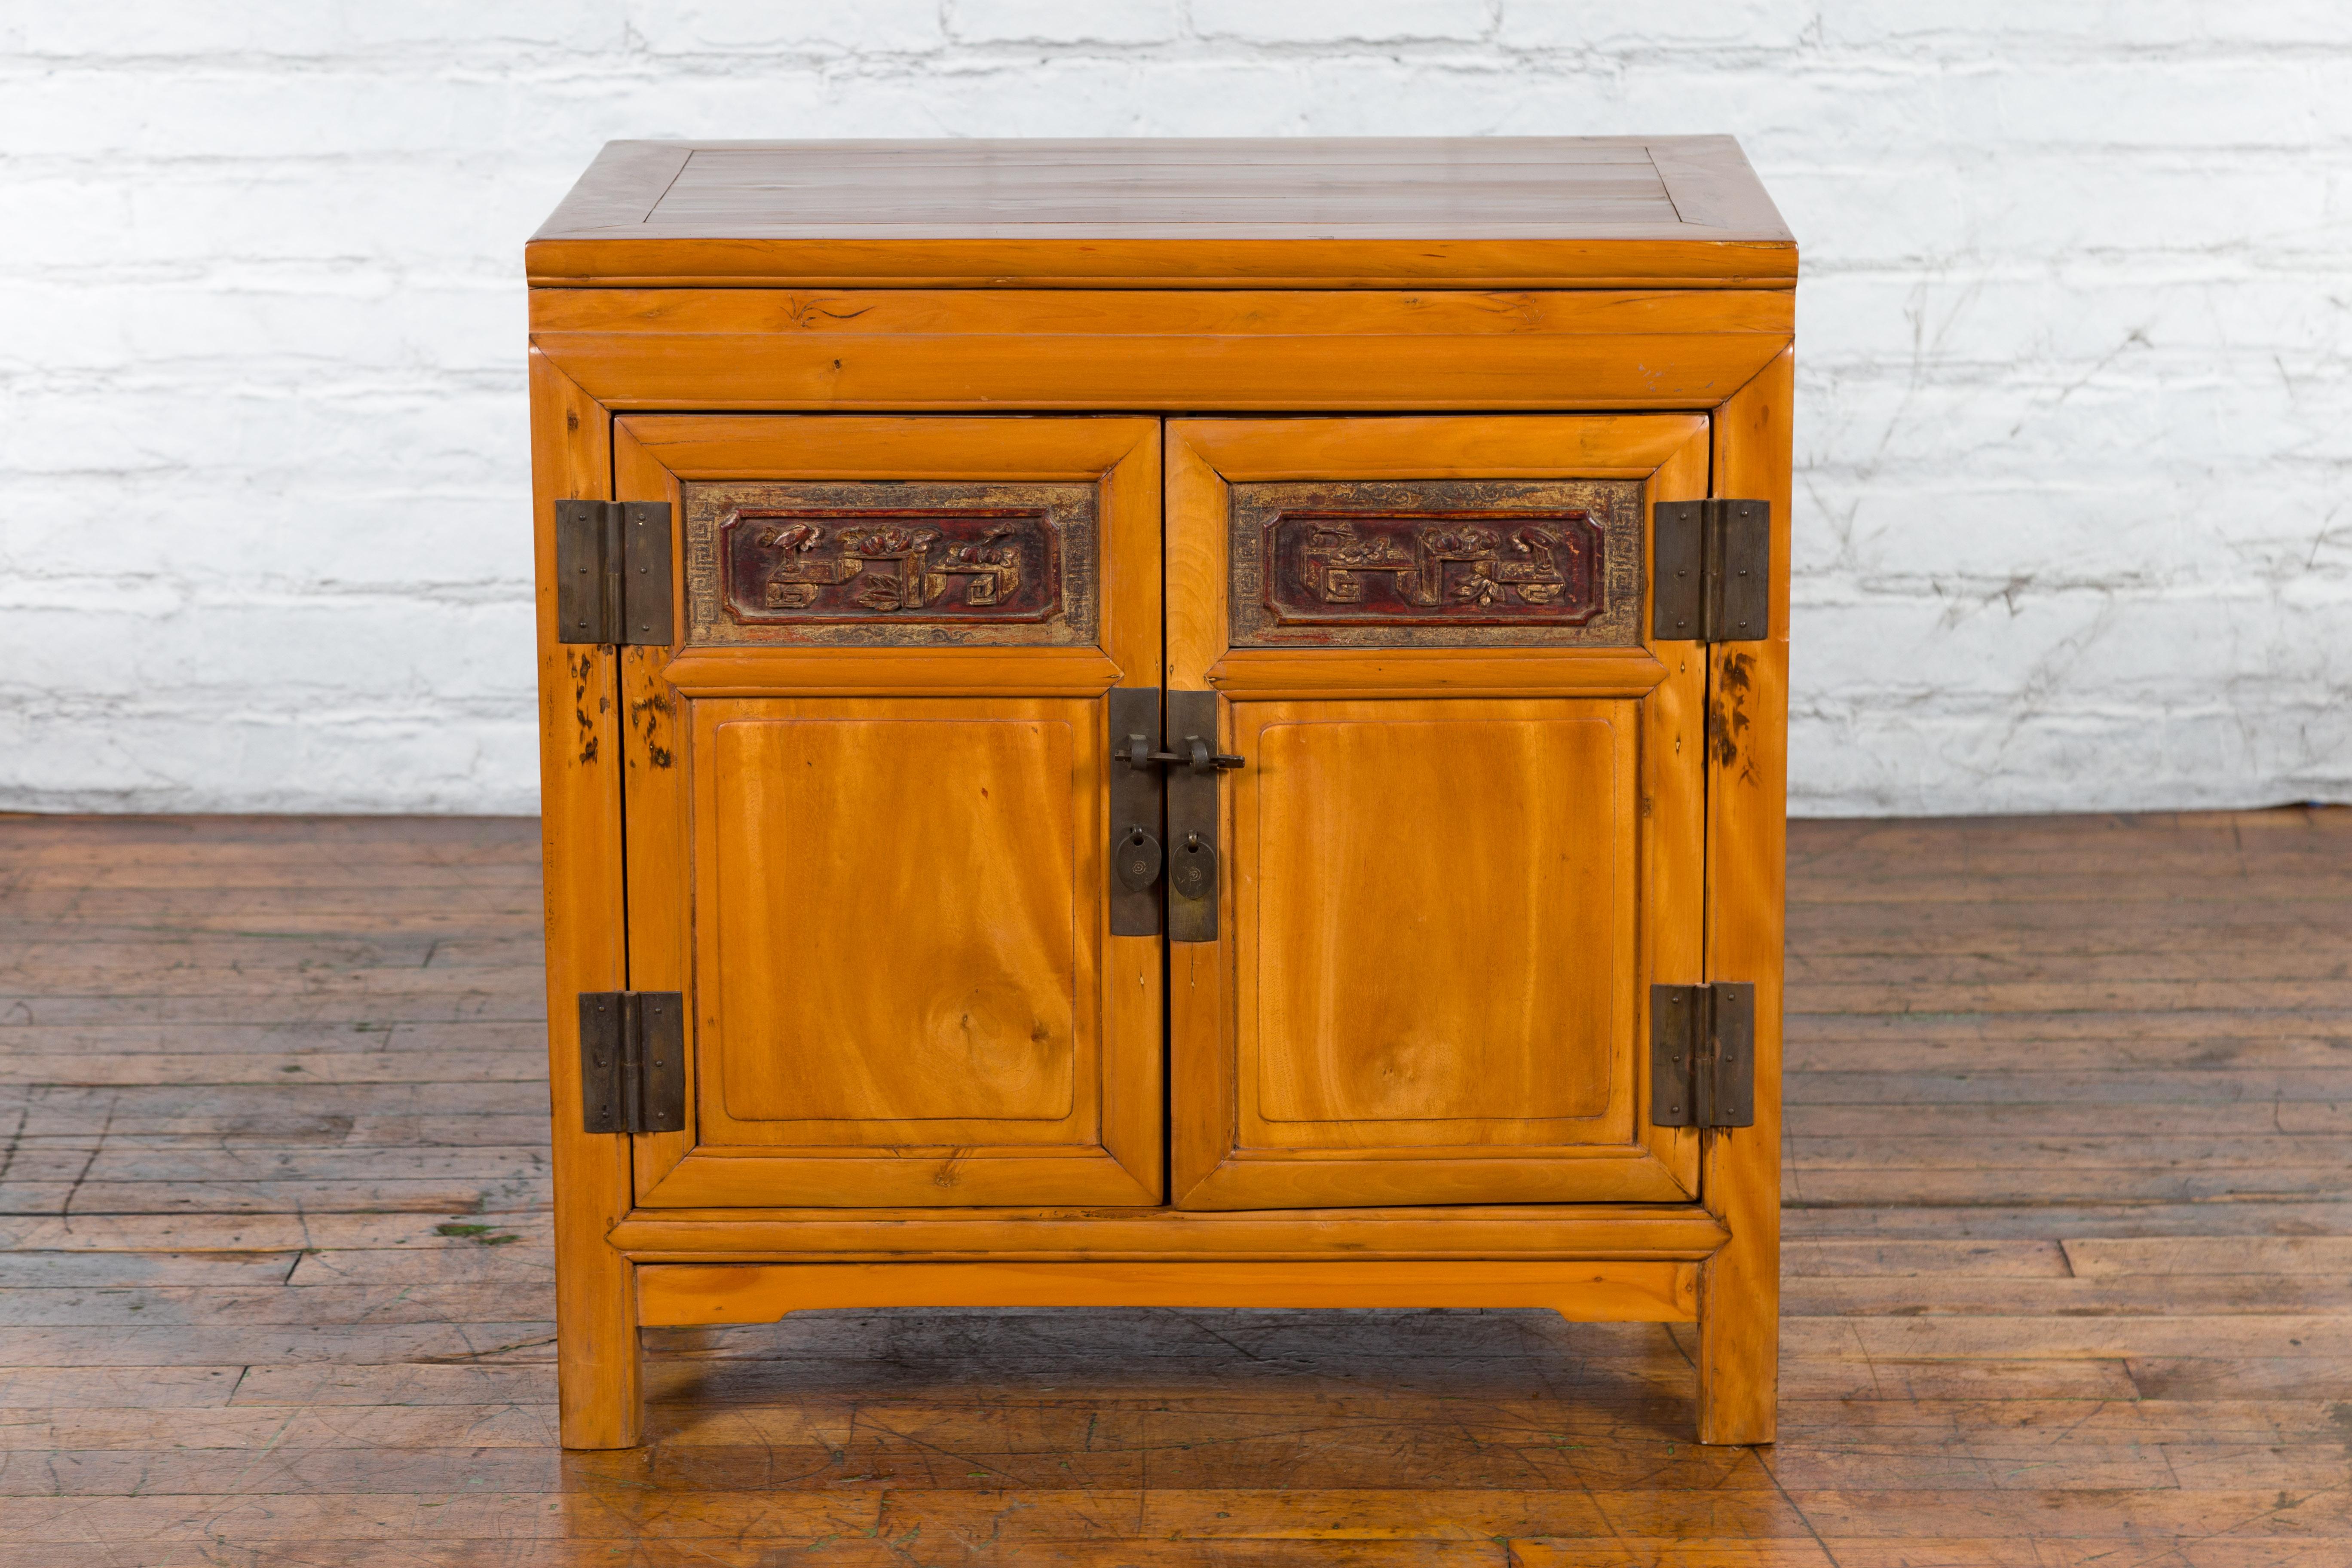 A Chinese elmwood side cabinet from the early 20th century with carved panels and hidden drawers. Created in China during the early years of the 20th century, this elmwood side cabinet features a rectangular top with central board, sitting above two